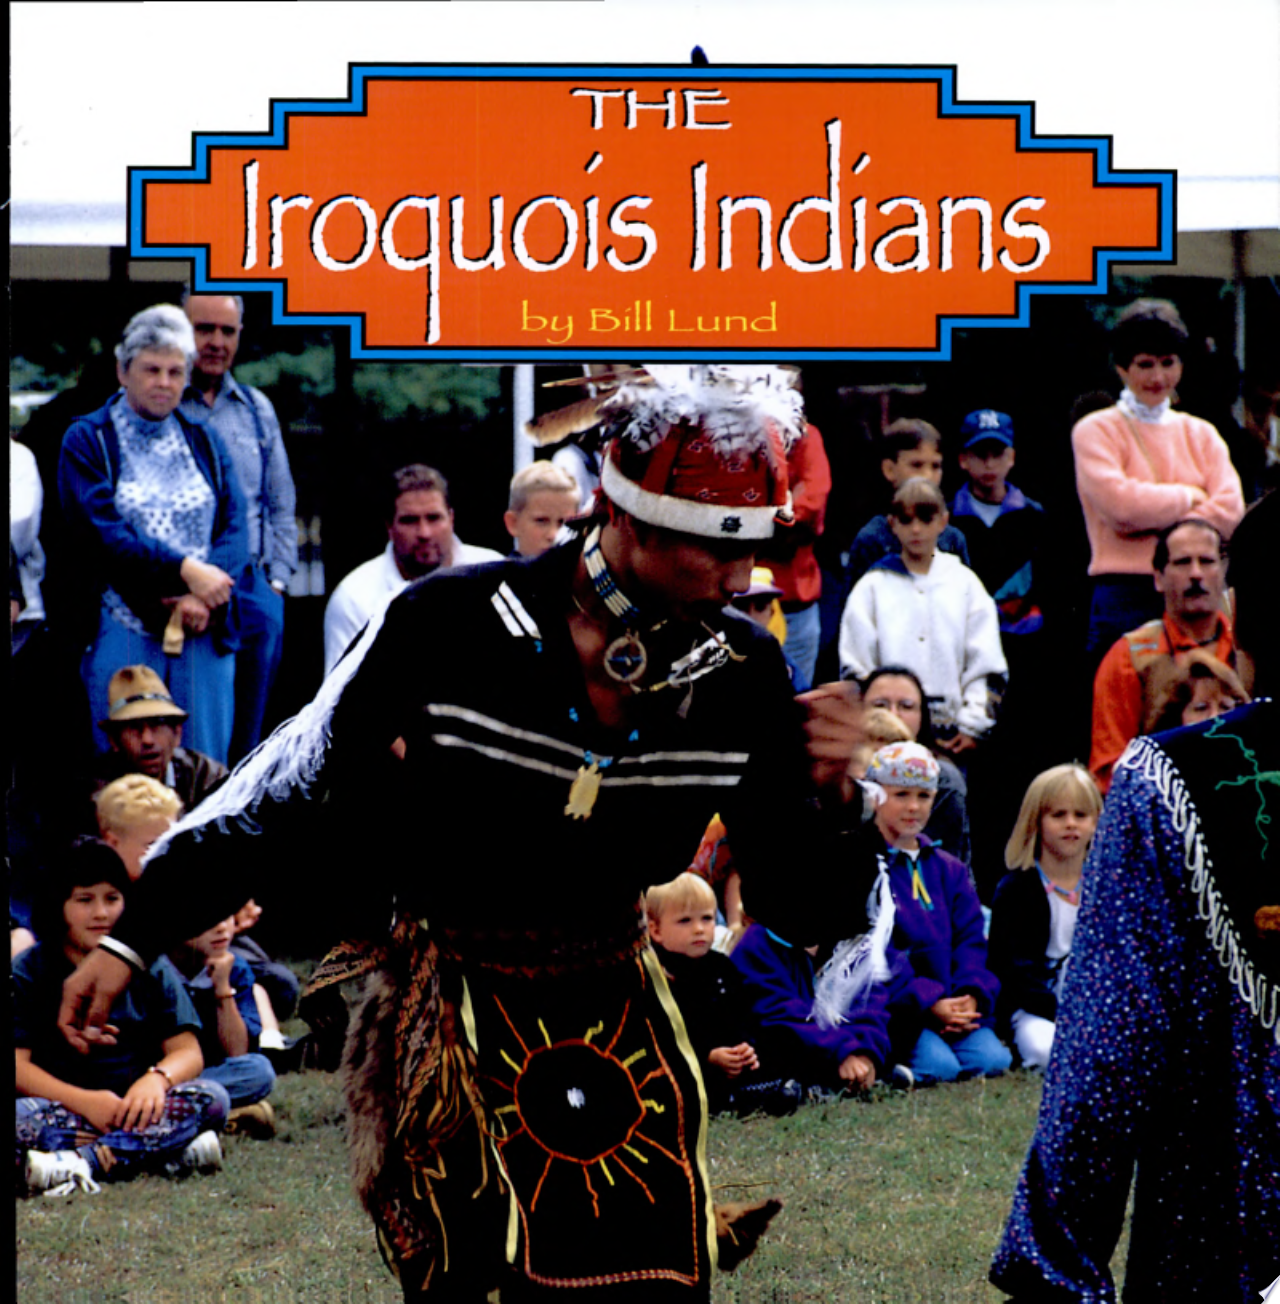 Image for "The Iroquois Indians"